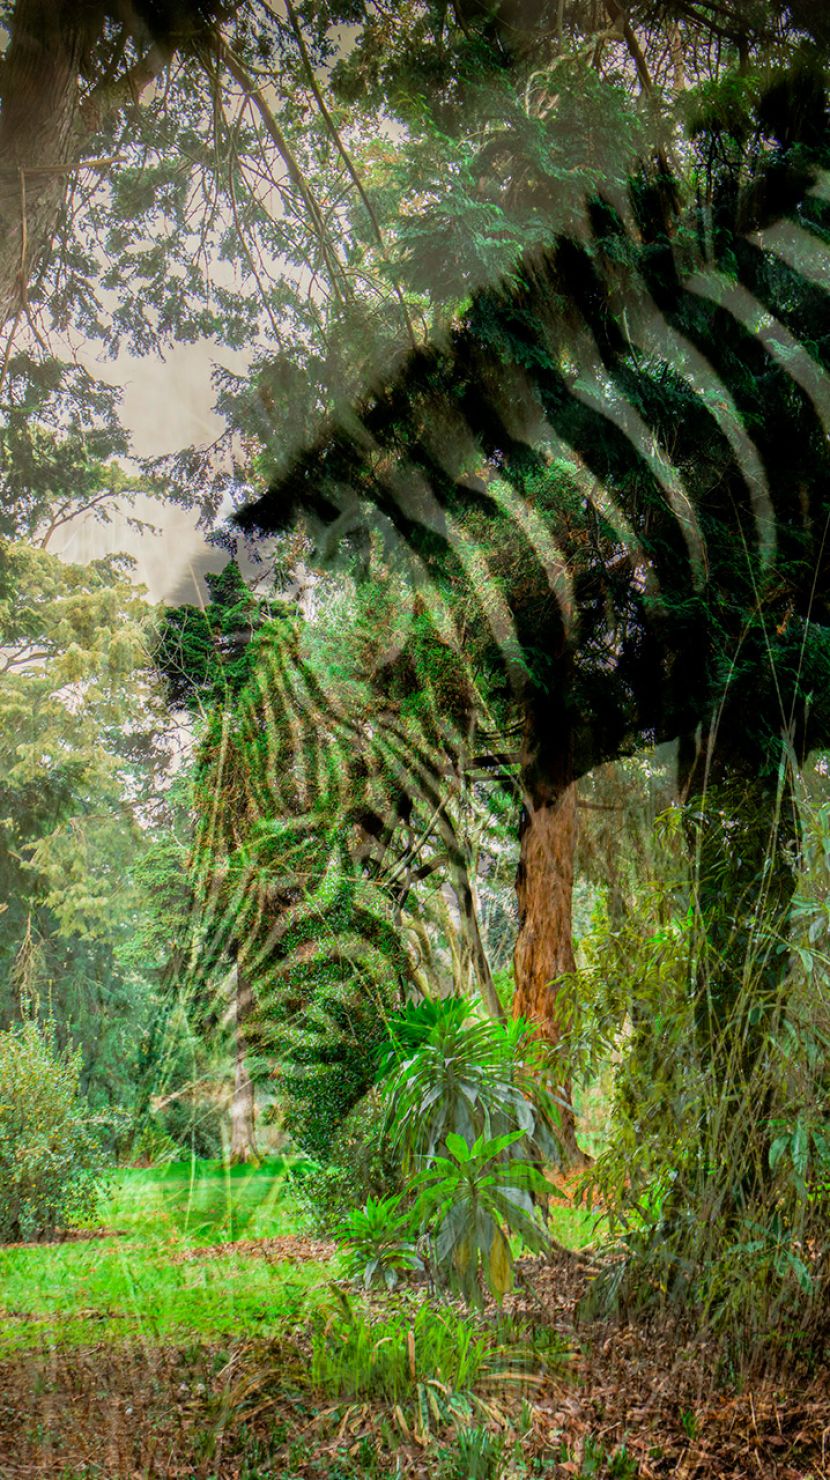 Head of a giant Zebra ghost eating grass in a jungle type setting 